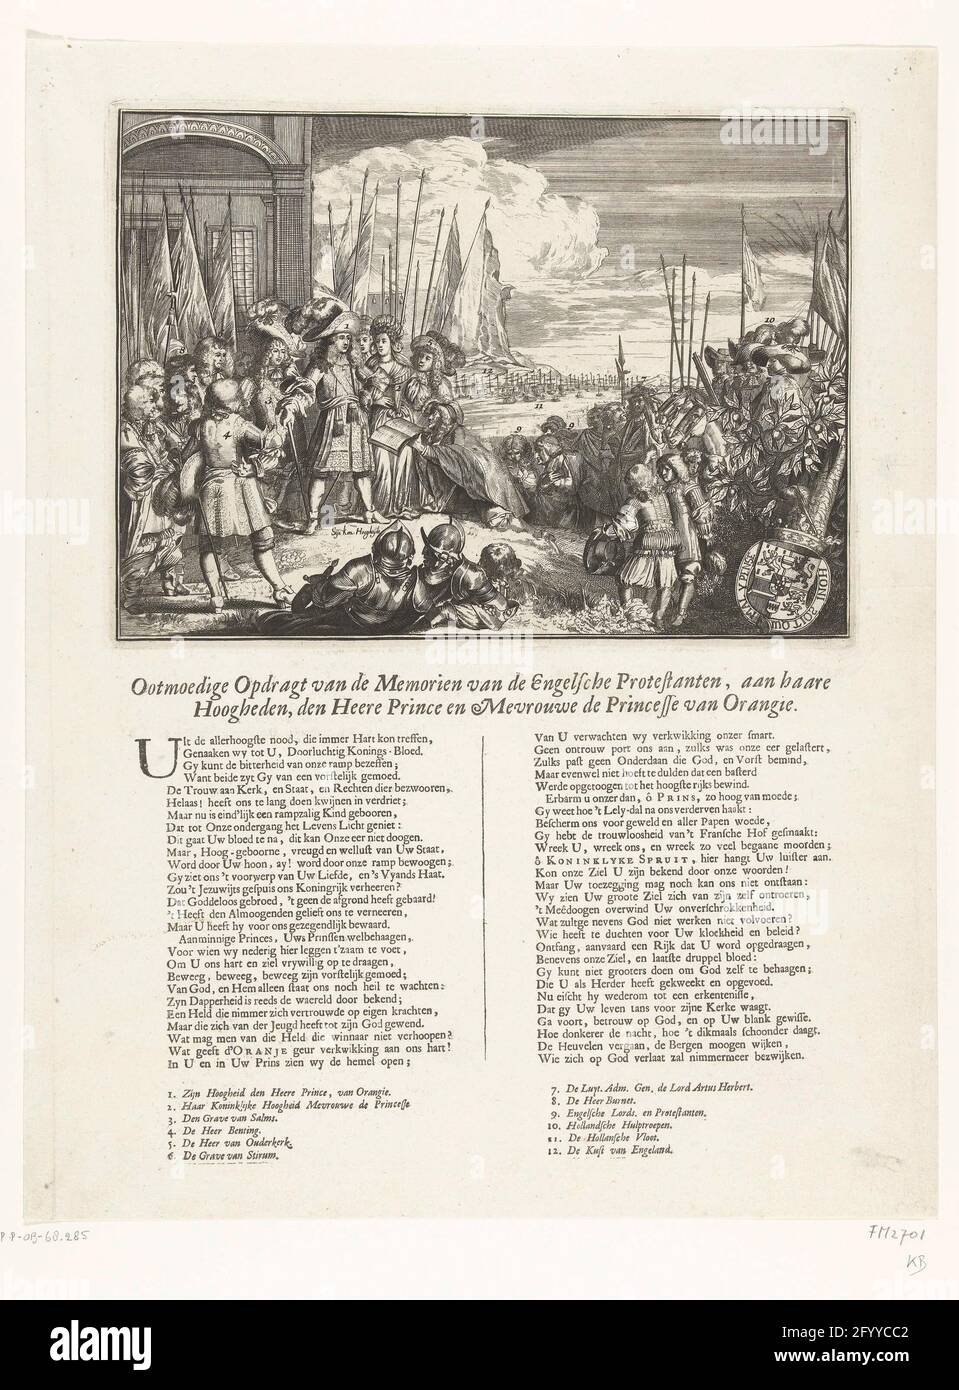 Call of the English Protestants to Prince and Princess of Orange, 1688; Incourcing the memorian of the English Protestants, Ana Haare Highnesses, the Lord Prince and Mrs. The Princesse of Orangie. Call of the English Protestants to support Prince Willem III and Princess Maria II Stuart, September 1688. The Prince and Princess for a house greeted by a crowd. Front right the Oranjeboom, behind it and the Dutch army and fleet. Under the plate a fresh in two columns with the legend 1-12 at the end. Stock Photo